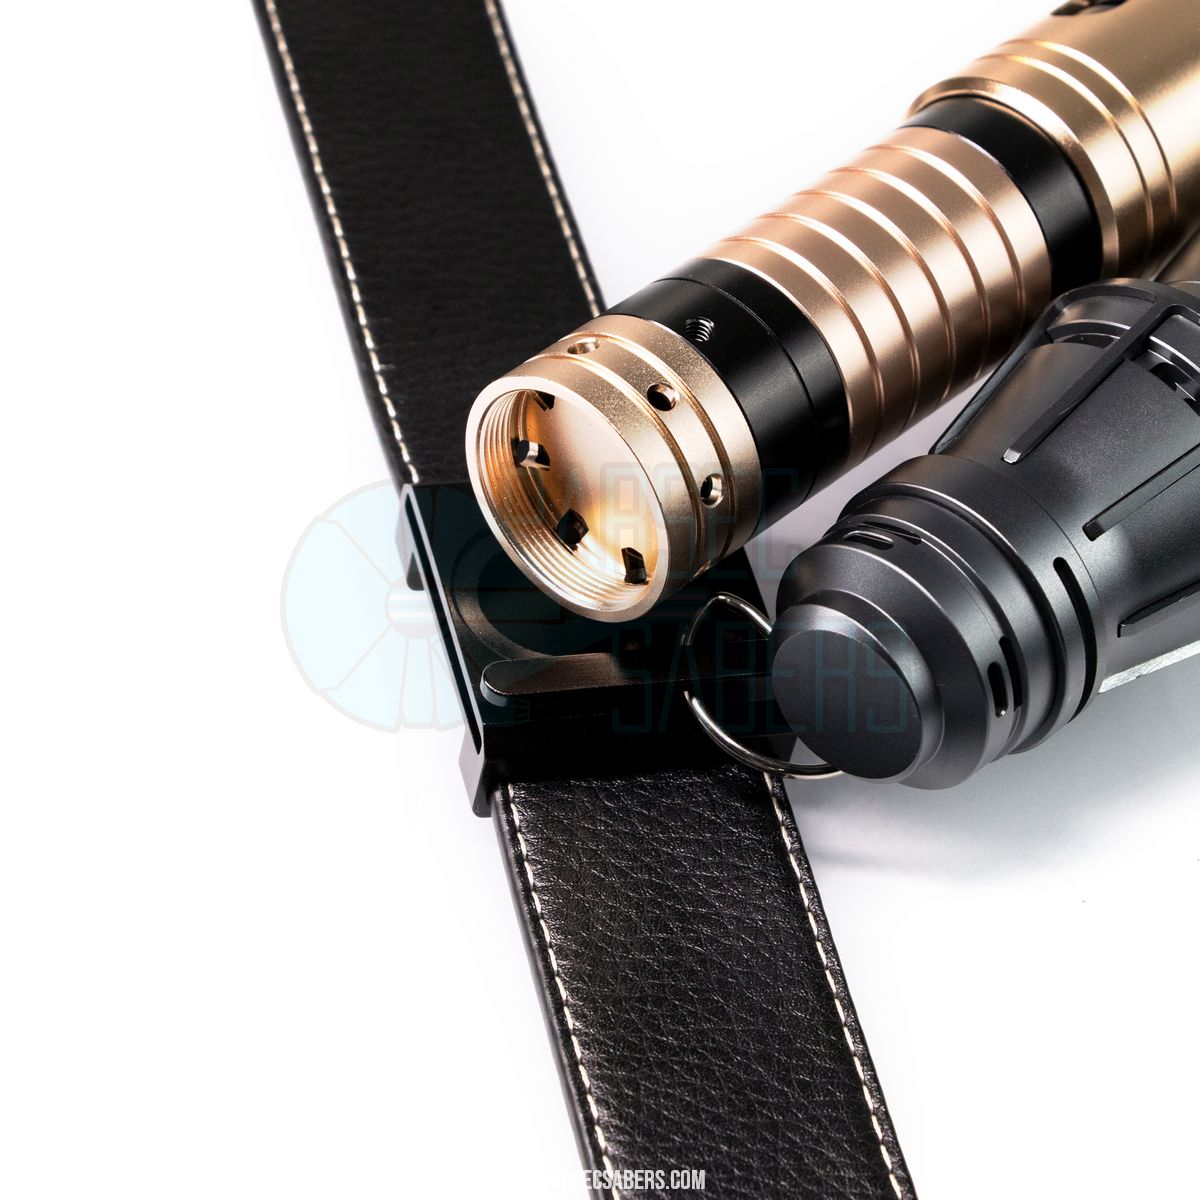 Belt Clip & Adapter - Parsec Saber Accessory & Add-on